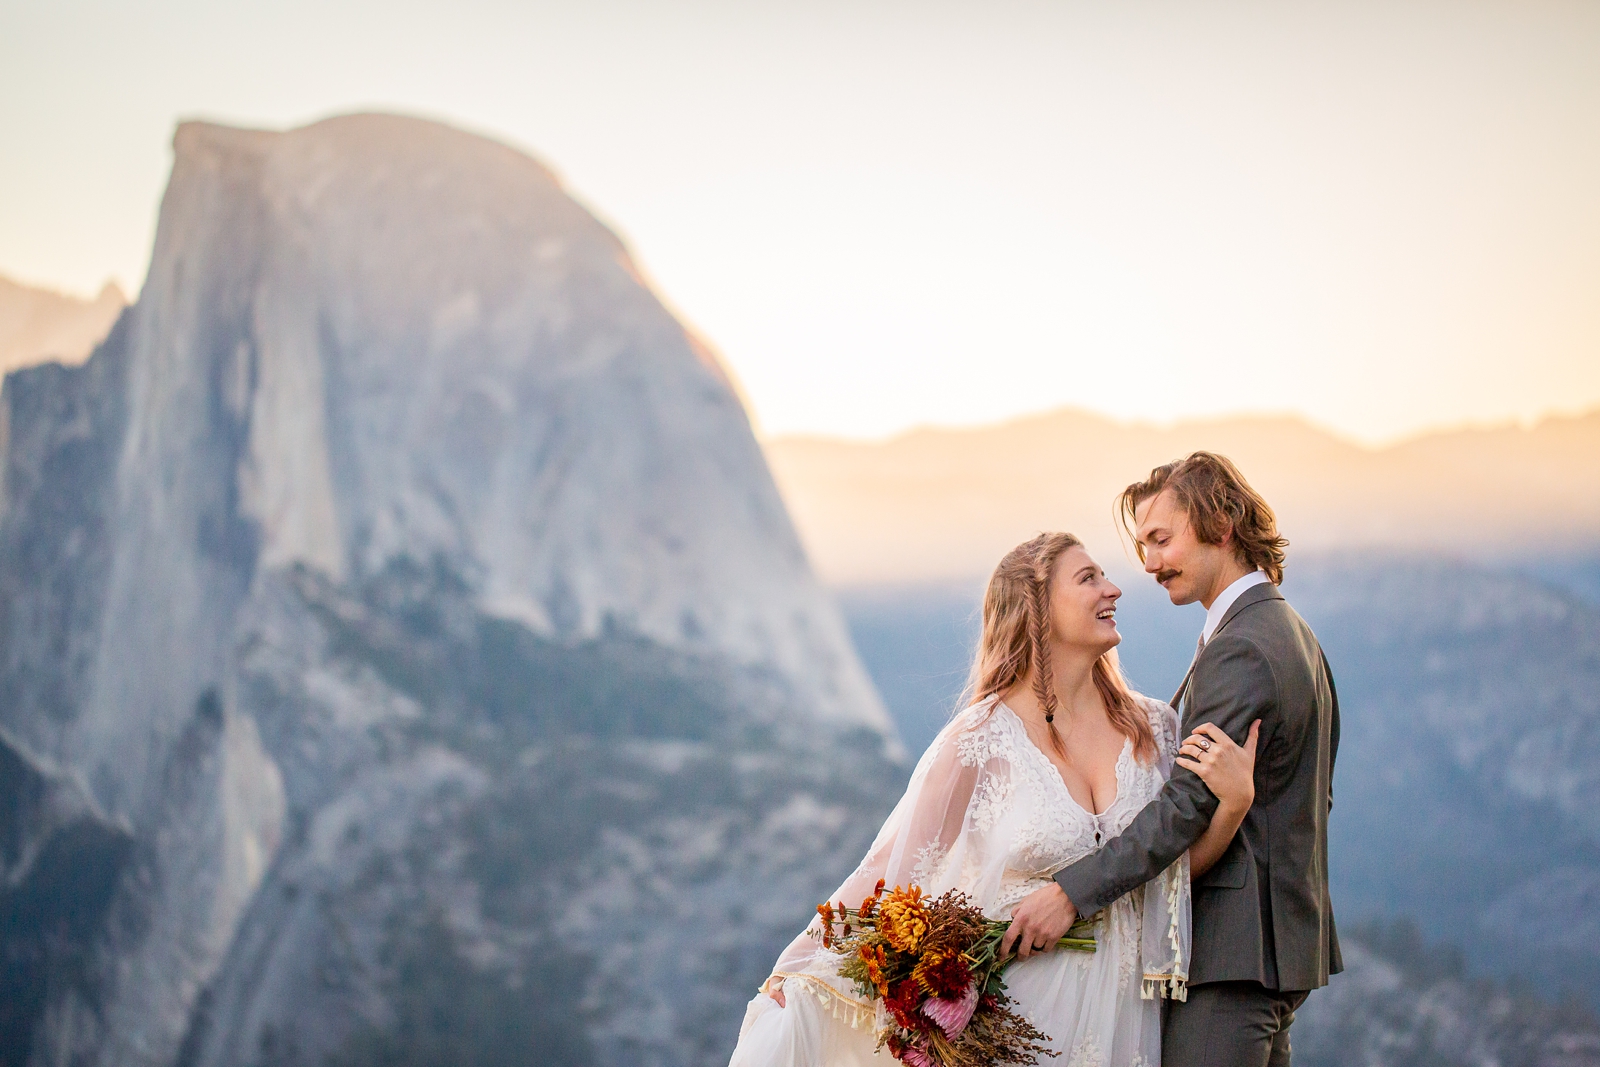 Playful eloping couple in front of Half Dome in Yosemite.